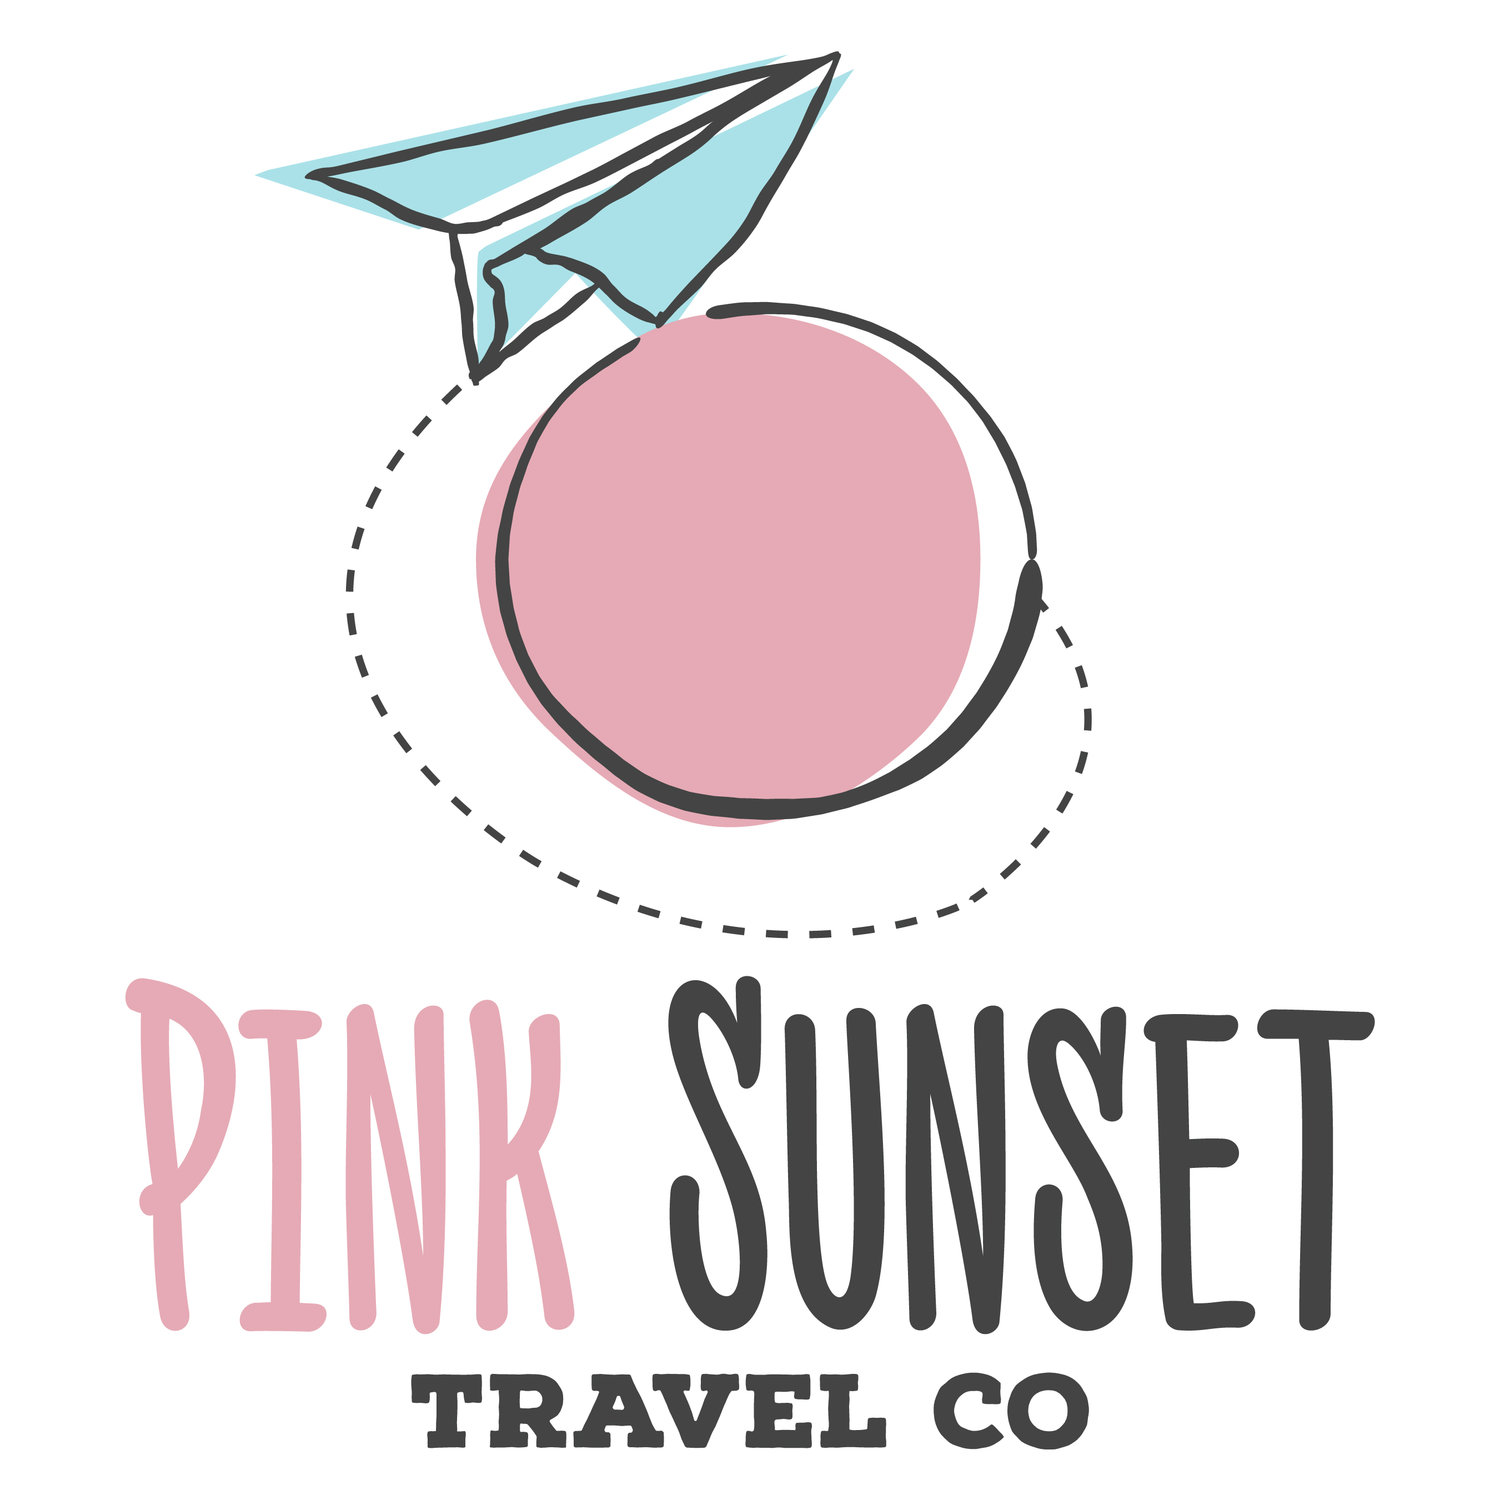 Pink Sunset Travel Co